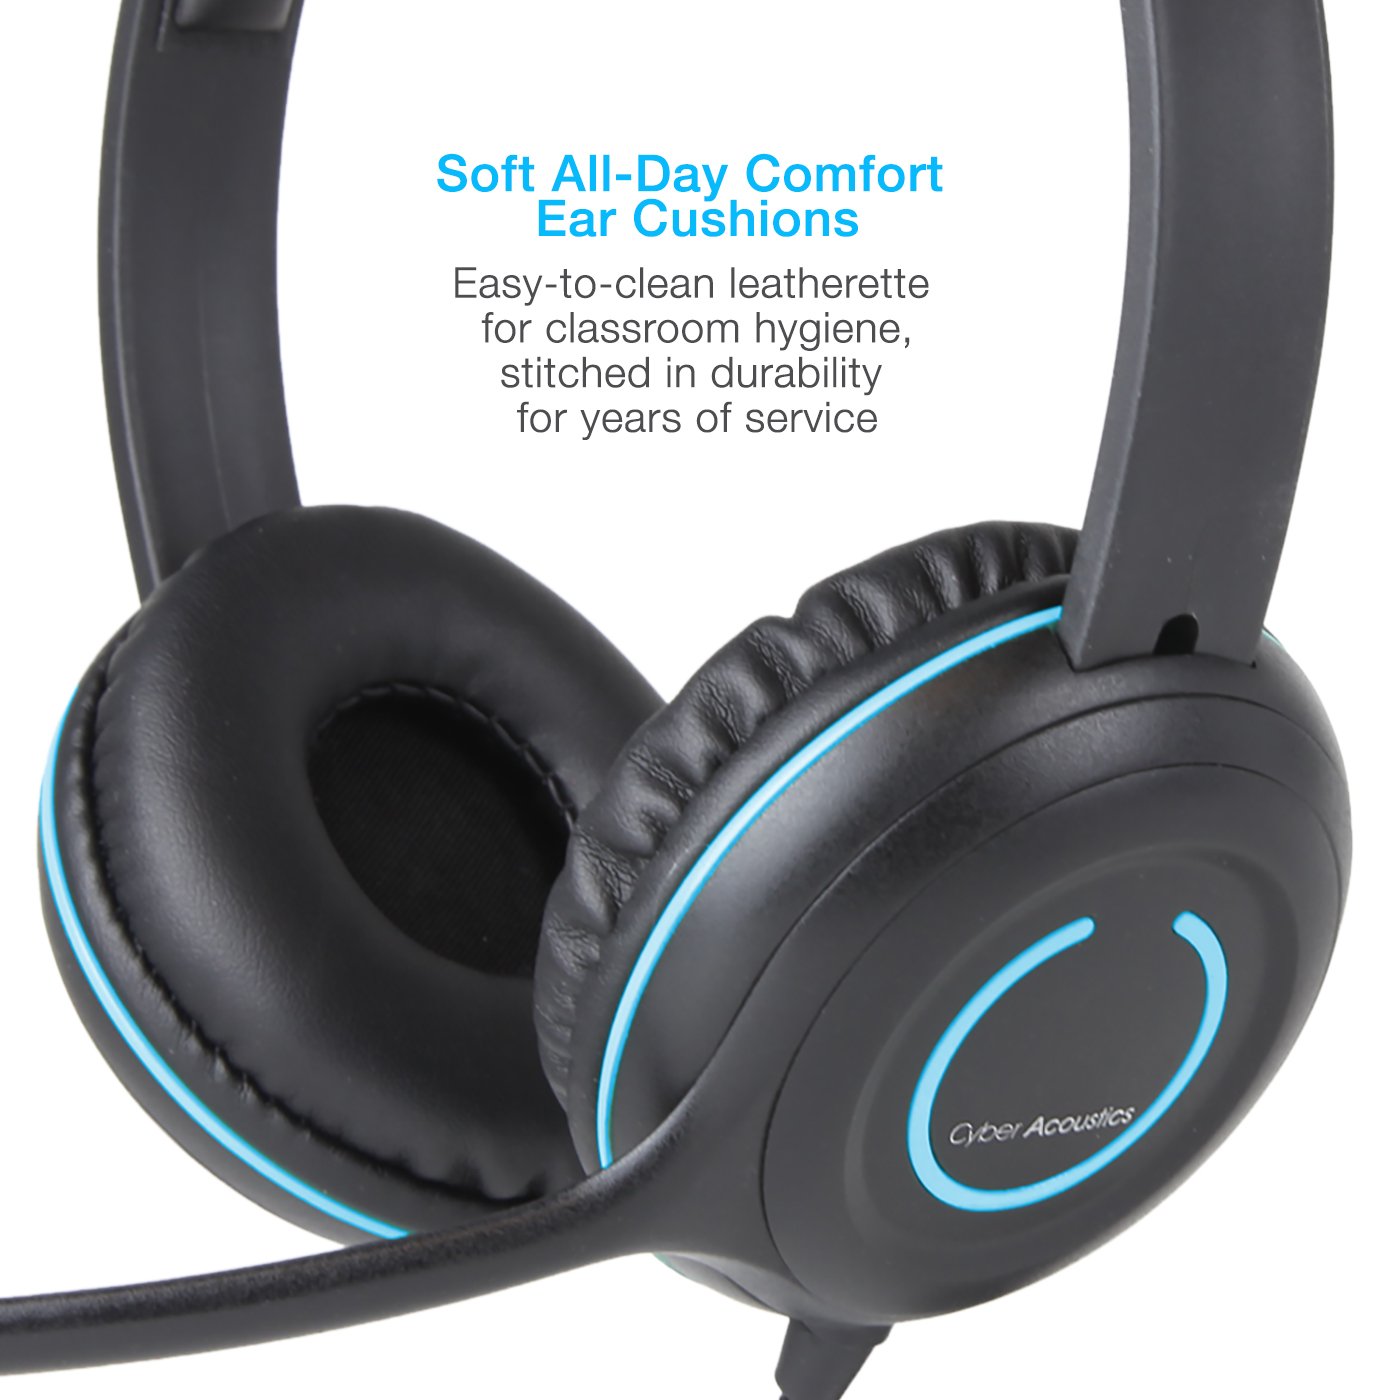 Cyber Acoustics (20 Pack) 3.5mm Stereo Headset with Headphones and Noise Cancelling Microphone for PCs, Tablets, and Cell Phones in The Classroom or Home (AC-5002) …